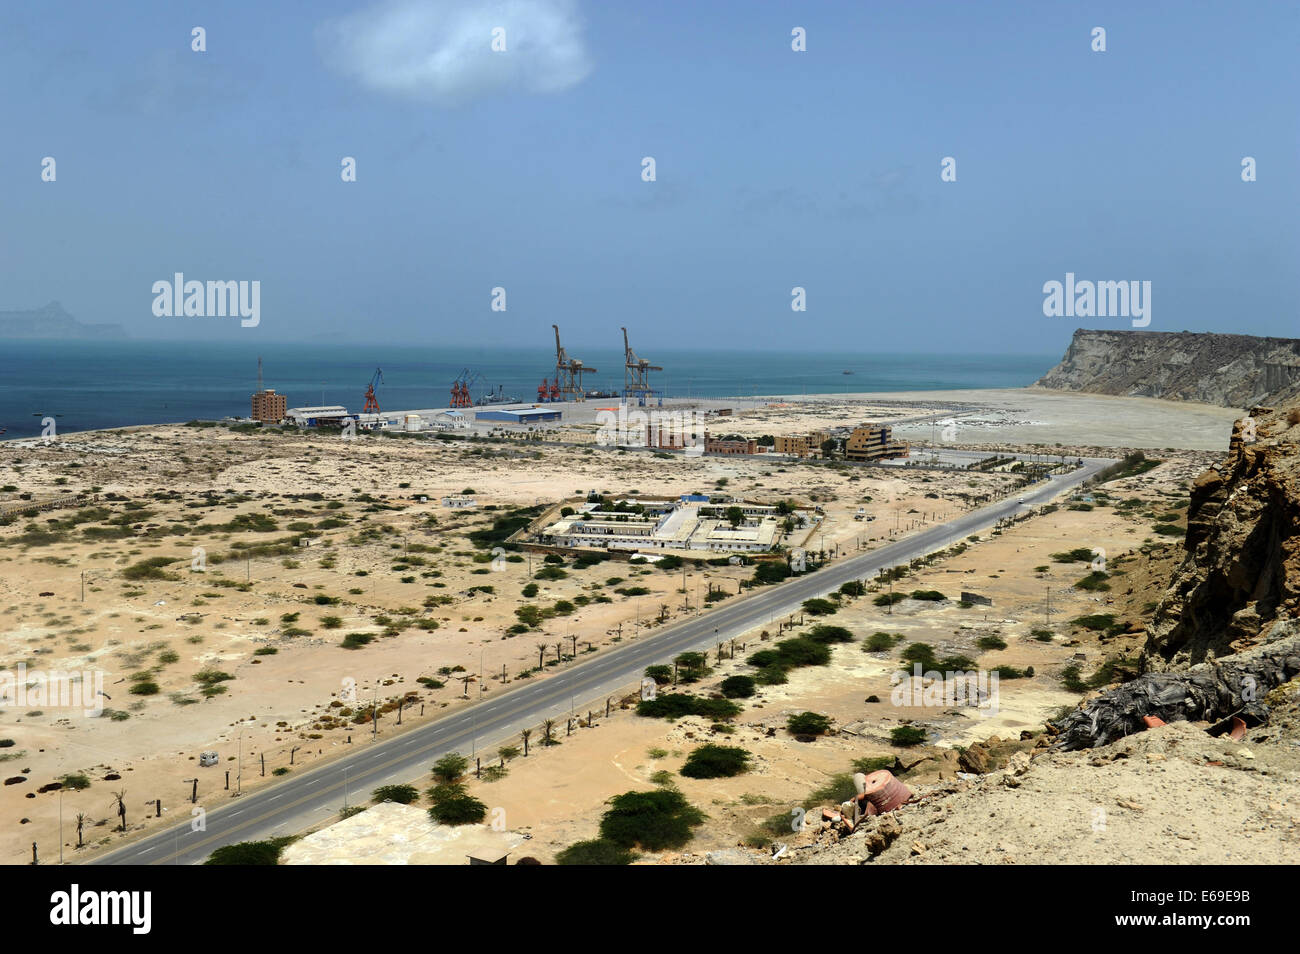 Islamabad. 18th Aug, 2014. Photo taken on Aug. 18, 2014 shows a view of Gwadar Port in Balochistan province, Pakistan. Gwadar Port is a warm-water, deep-sea port situated on the Arabian Sea at Gwadar in Balochistan province of Pakistan. Gwadar Port is owned by the government-owned Gwadar Port Authority and operated by China Overseas Port Holding Company (COPHC). © Huang Zongzhi/Xinhua/Alamy Live News Stock Photo